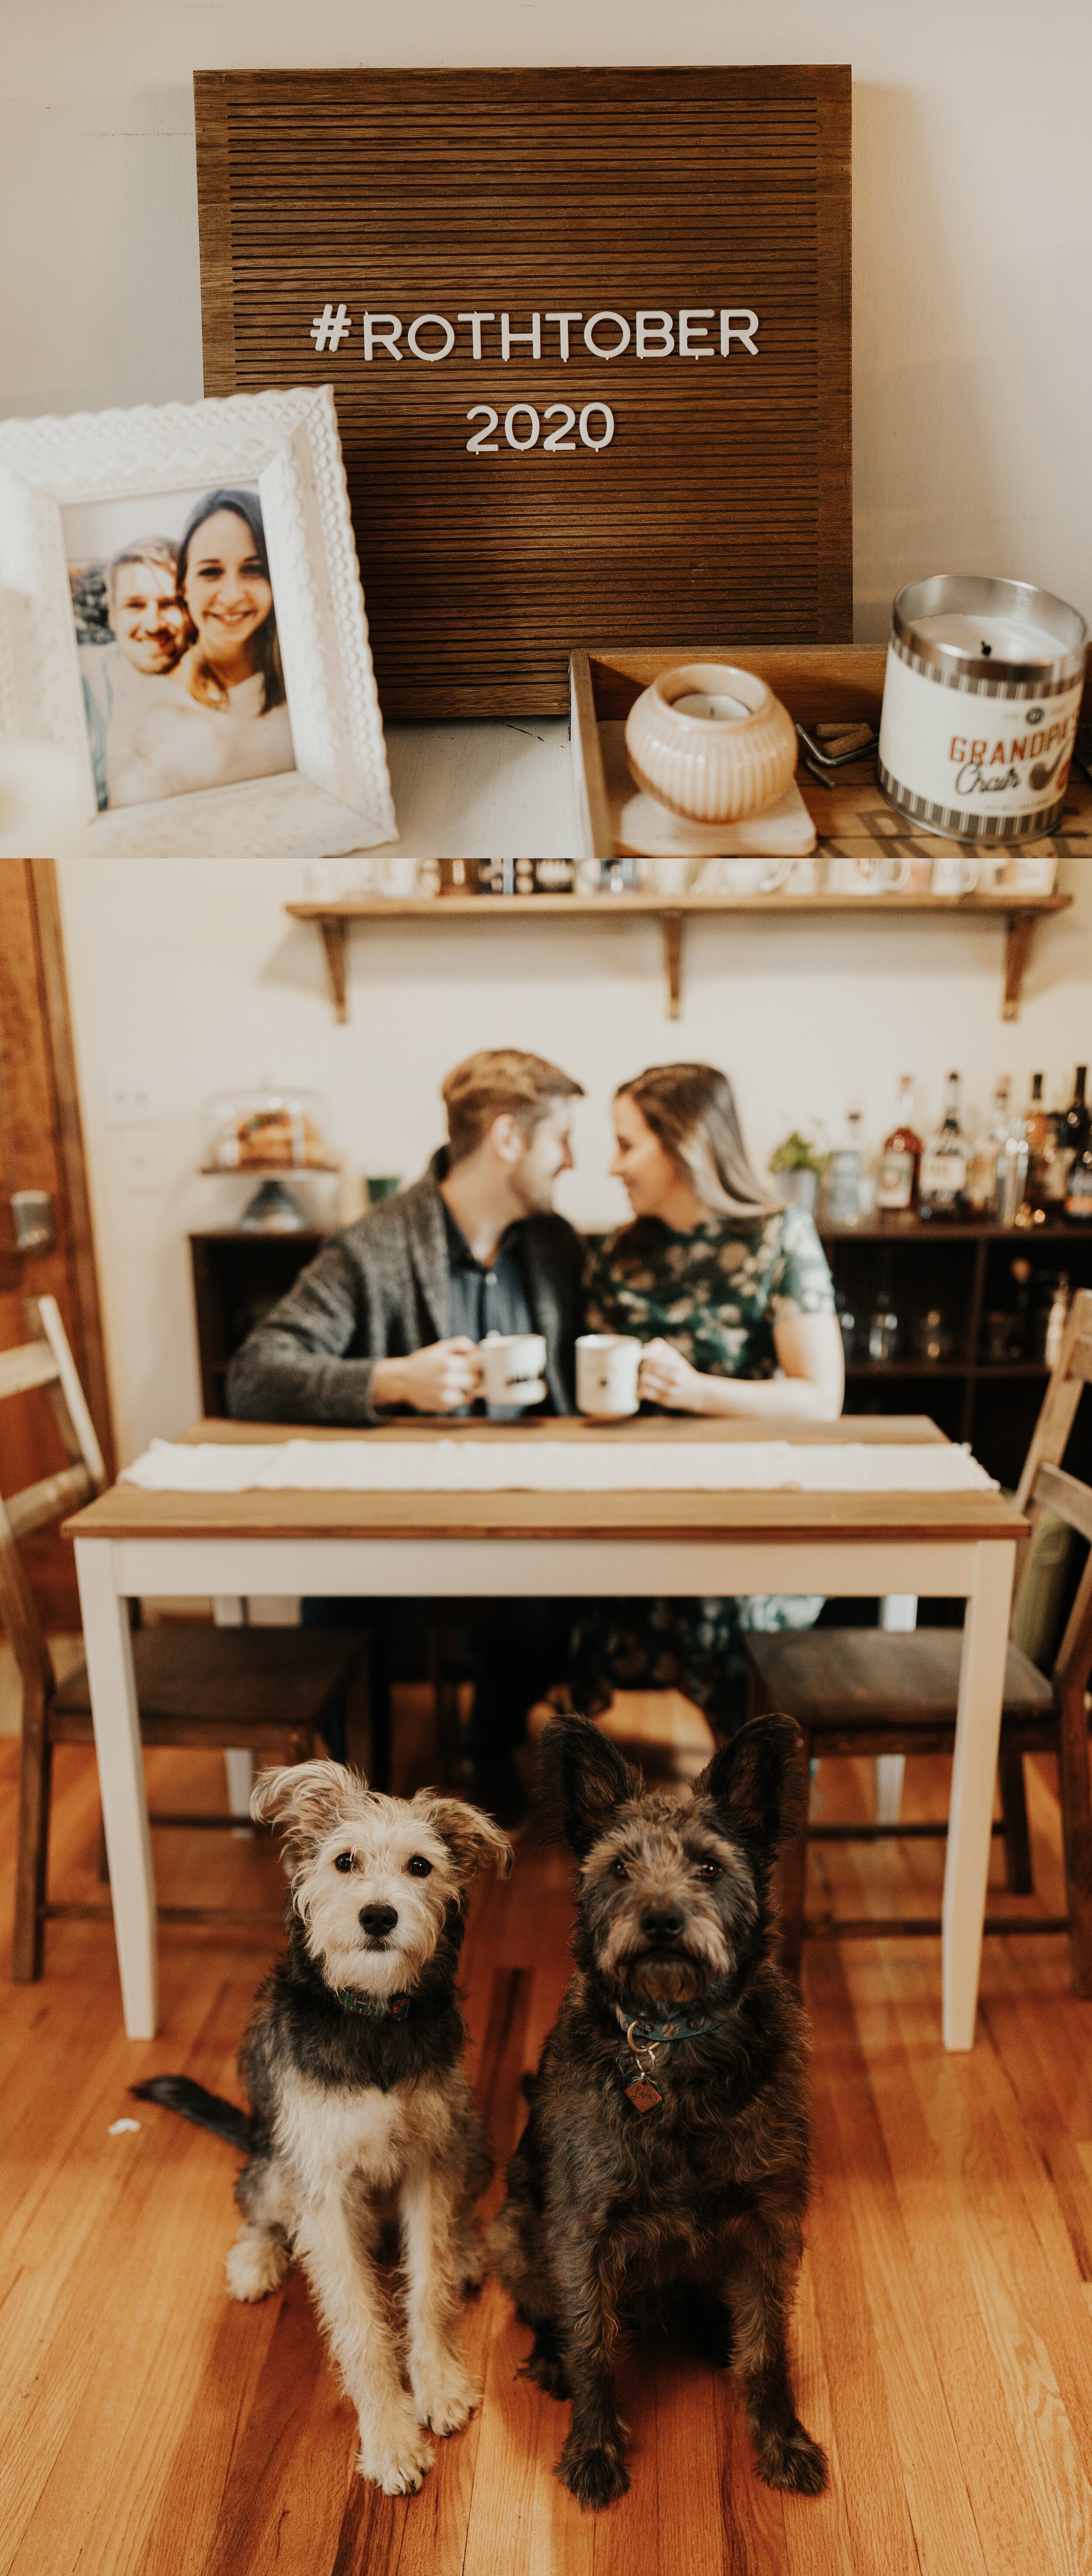 jessika-christine-photography-in+home-engagement-couples-cozy-adventurous-session (1).jpg